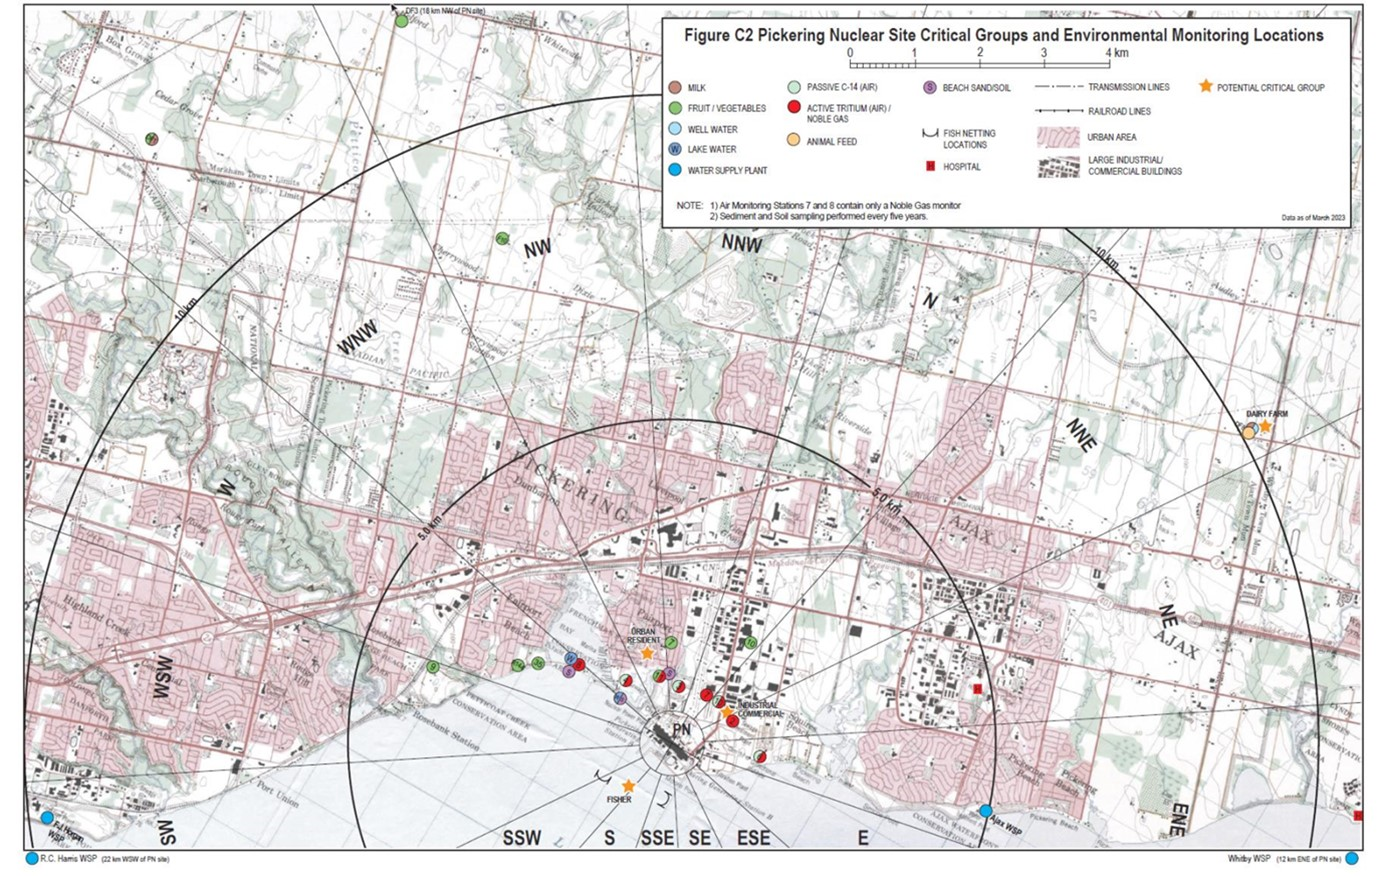 Sampling locations for the Pickering Nuclear Site environmental monitoring program including air, fruit/vegetable, animal feed, eggs and poultry, milk, soil and sand, surface water, well water, groundwater, sediment and fish monitoring. 